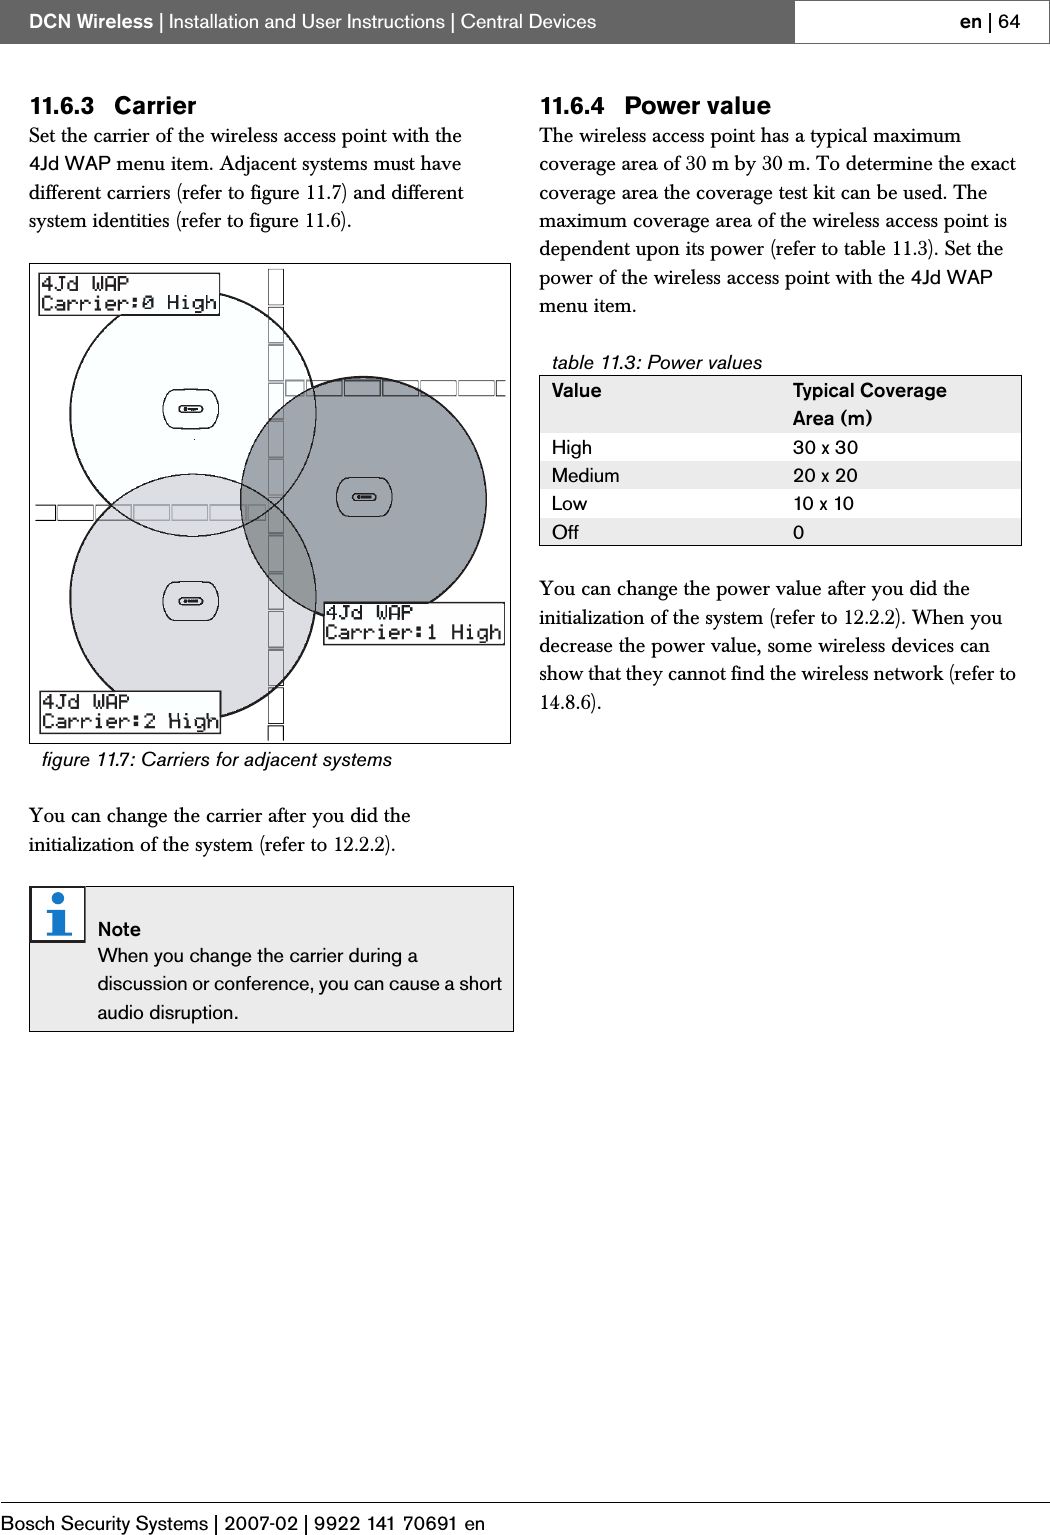 Page 35 of Bosch Security Systems DCNWAP Wireless Access Point User Manual Part 2